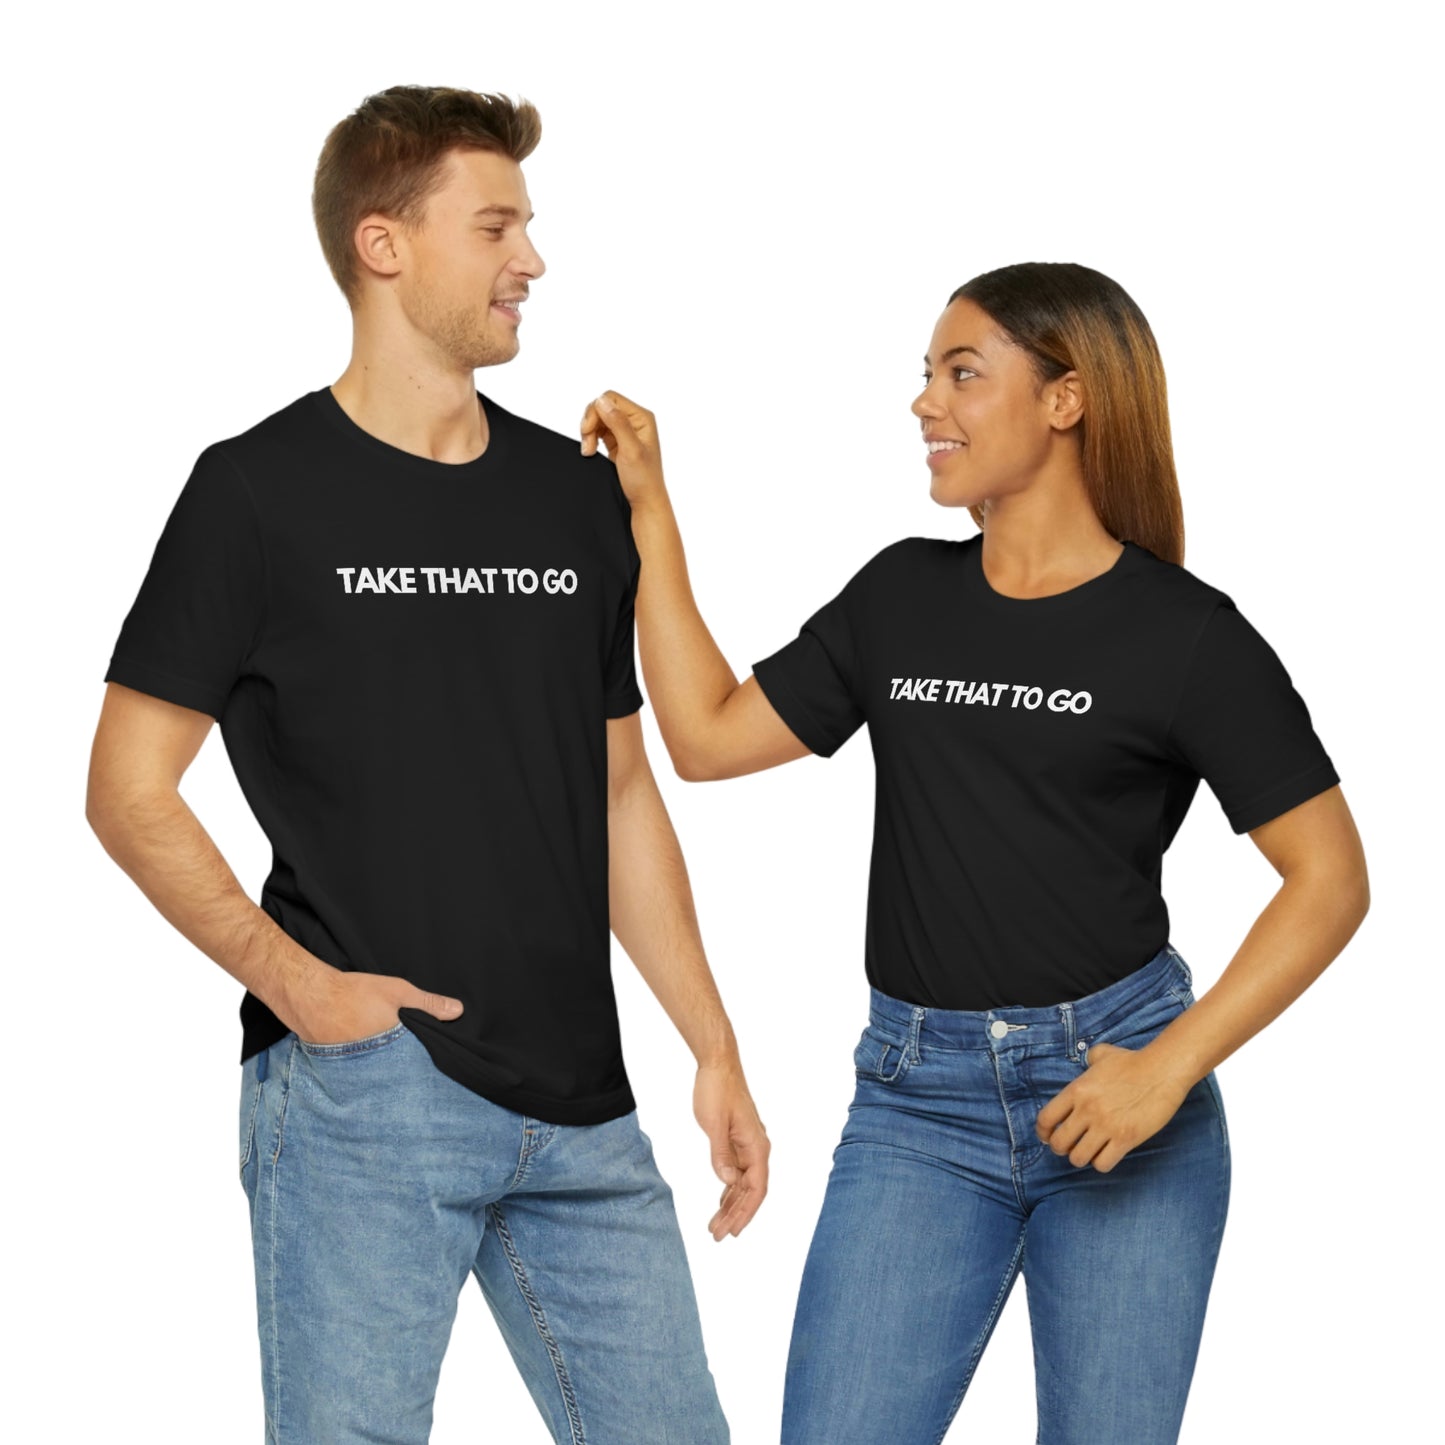 TAKE THAT TO GO Unisex Jersey Short Sleeve Tee